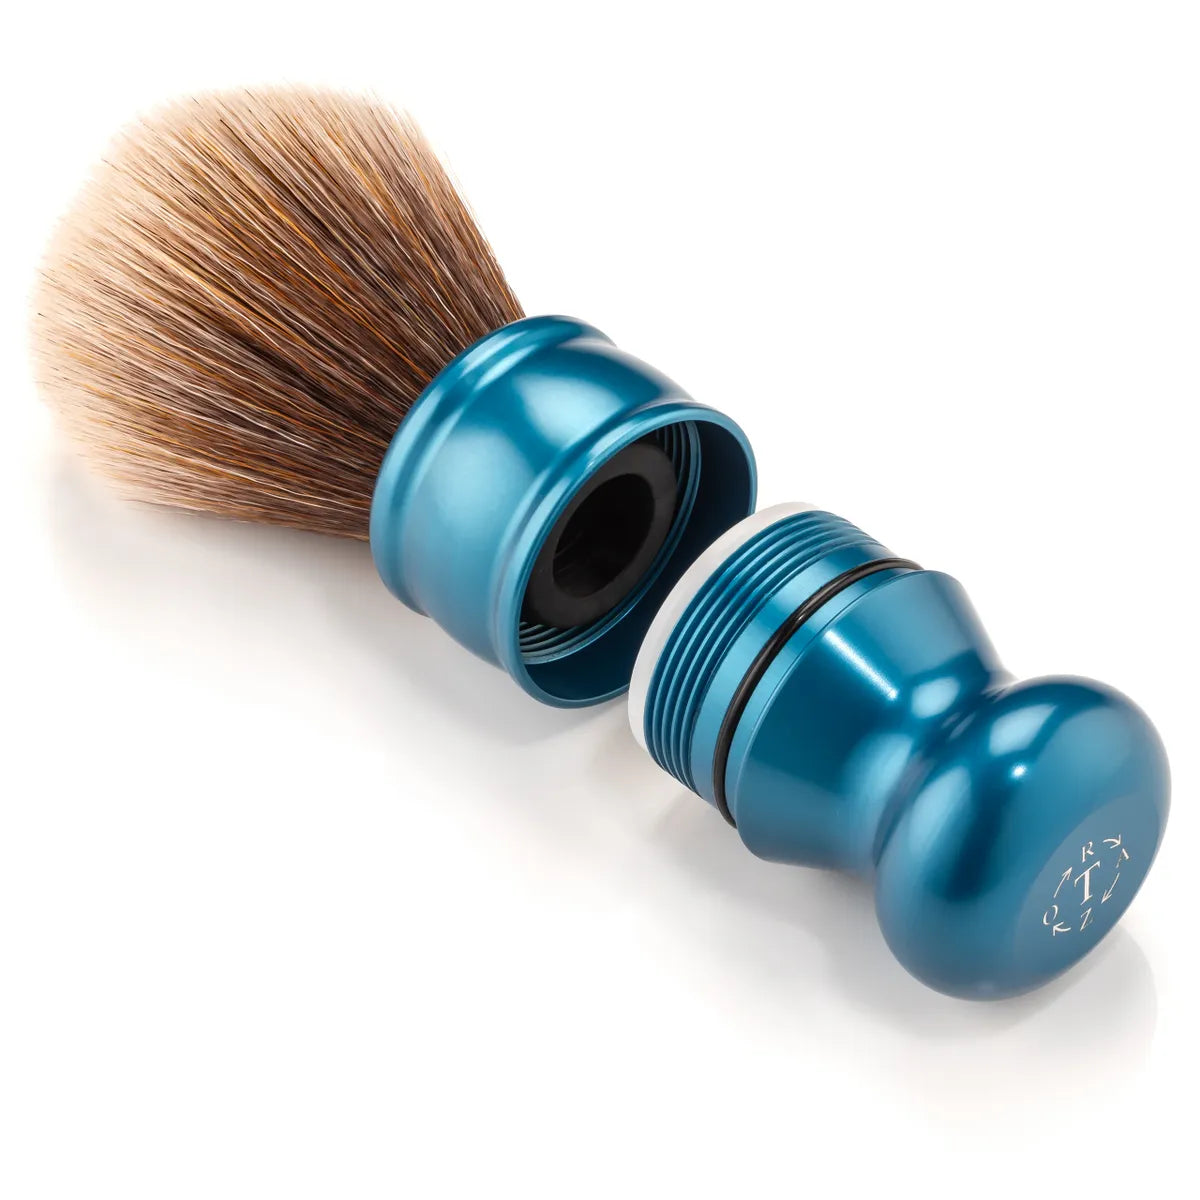 TRBR: Adjustable Brush Handle - Holds Knots 20 mm to 28 mm